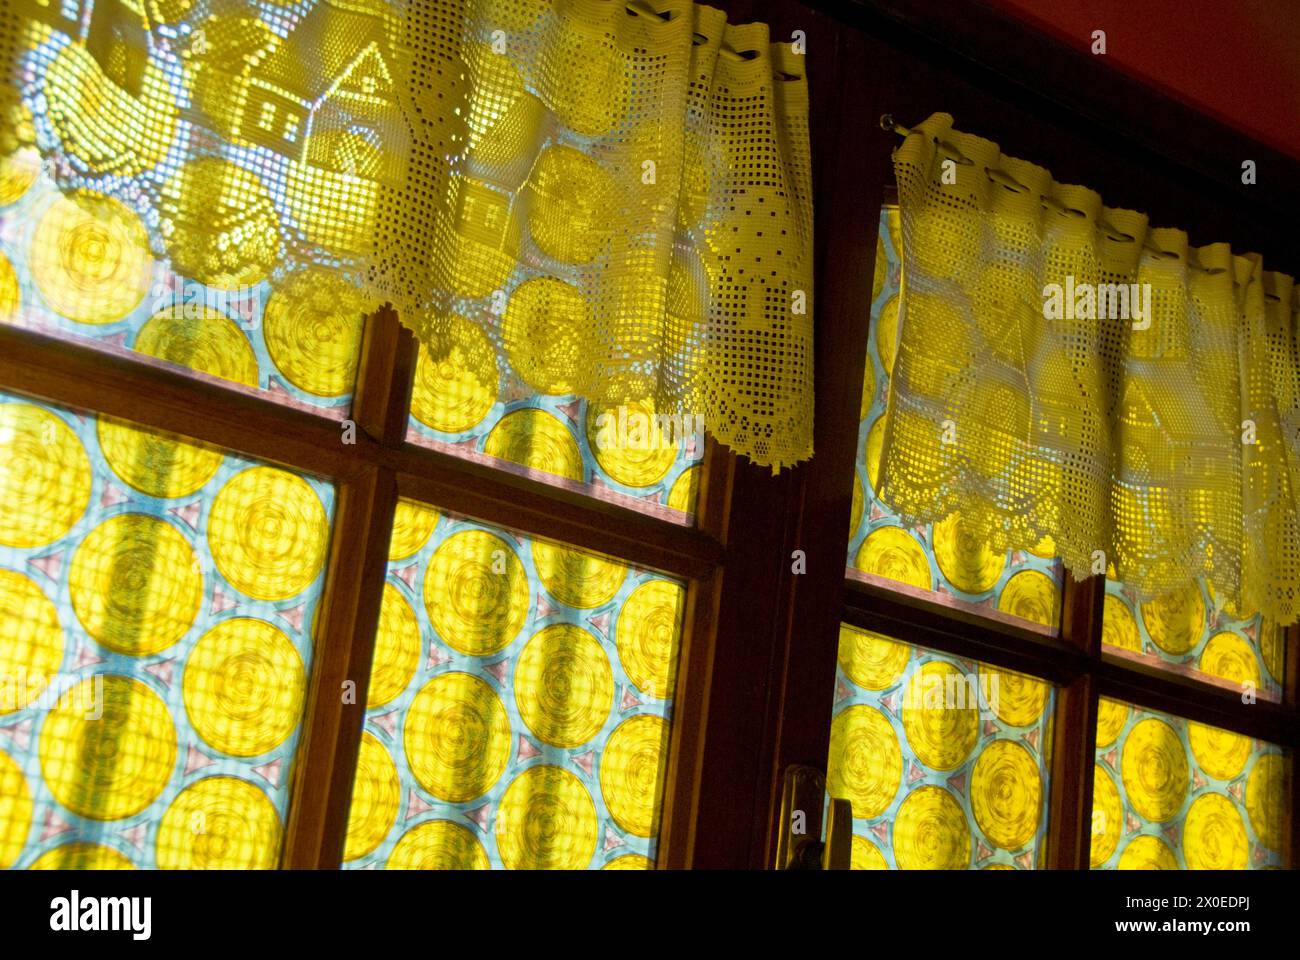 traditional lace curtains cover windows-Ushuaia, southernmost city in the world and the capital of the Tierra Del Fuego, Antarctica and Southern Stock Photo